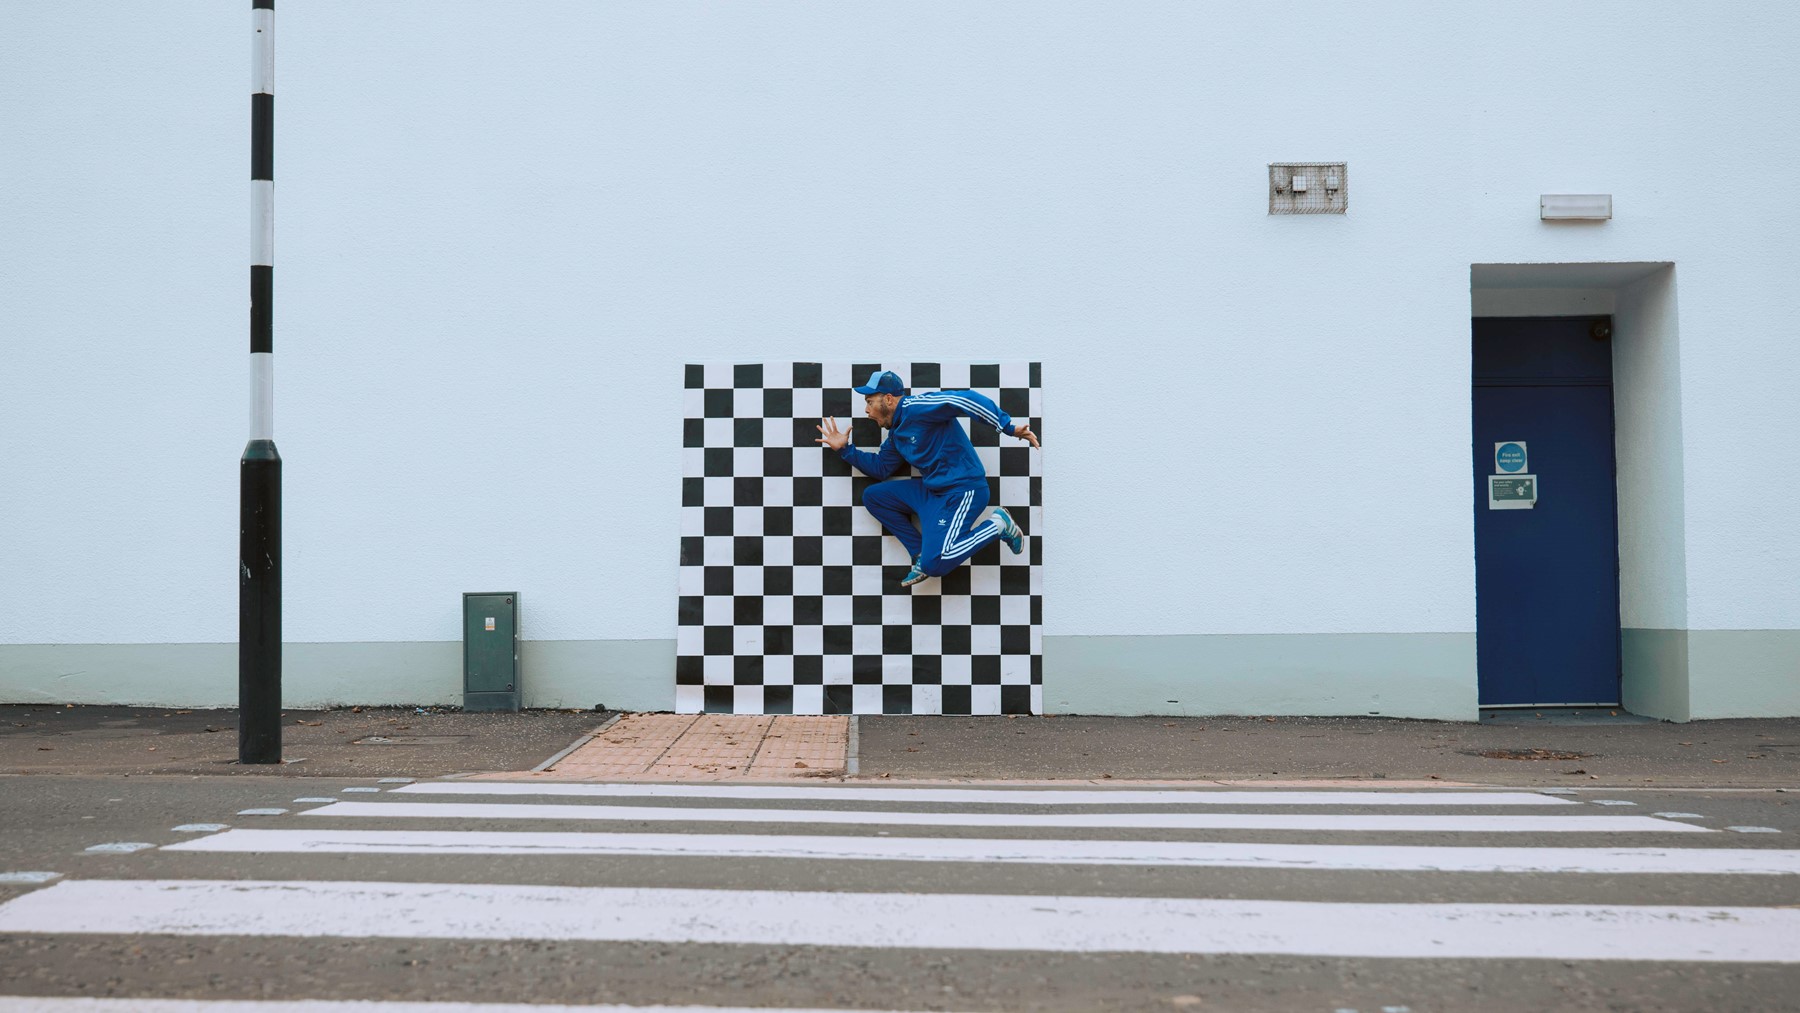 A performer in a tracksuit jumps high against a checkerboard vinyl, which sits in front of an urban scene